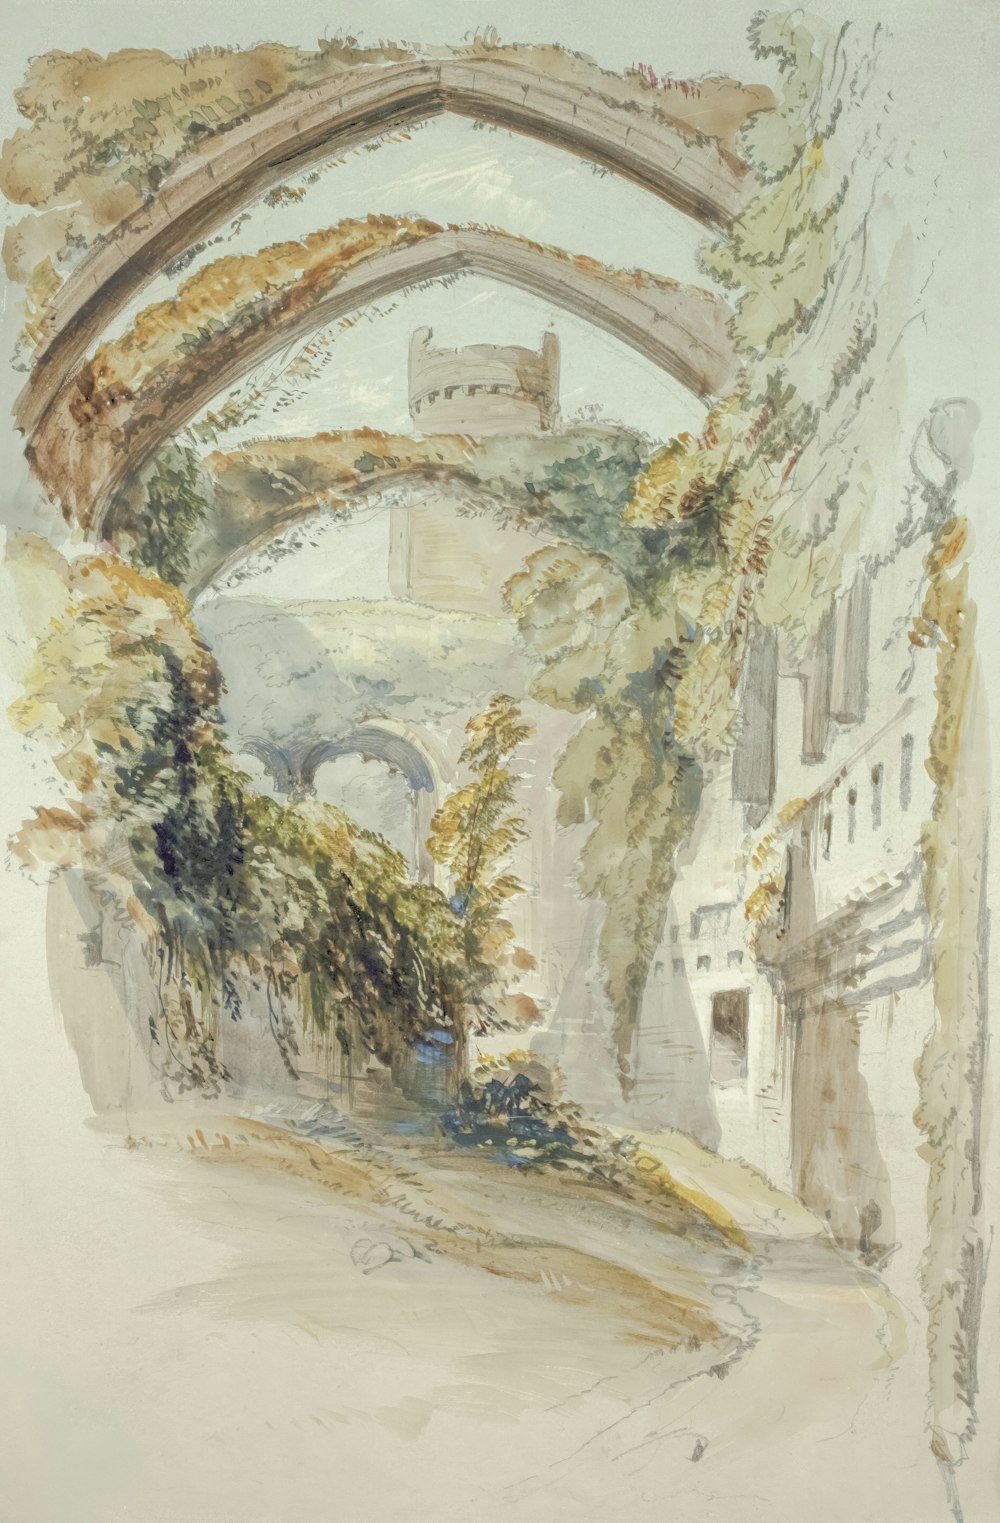 a painting of an archway leading to a castle